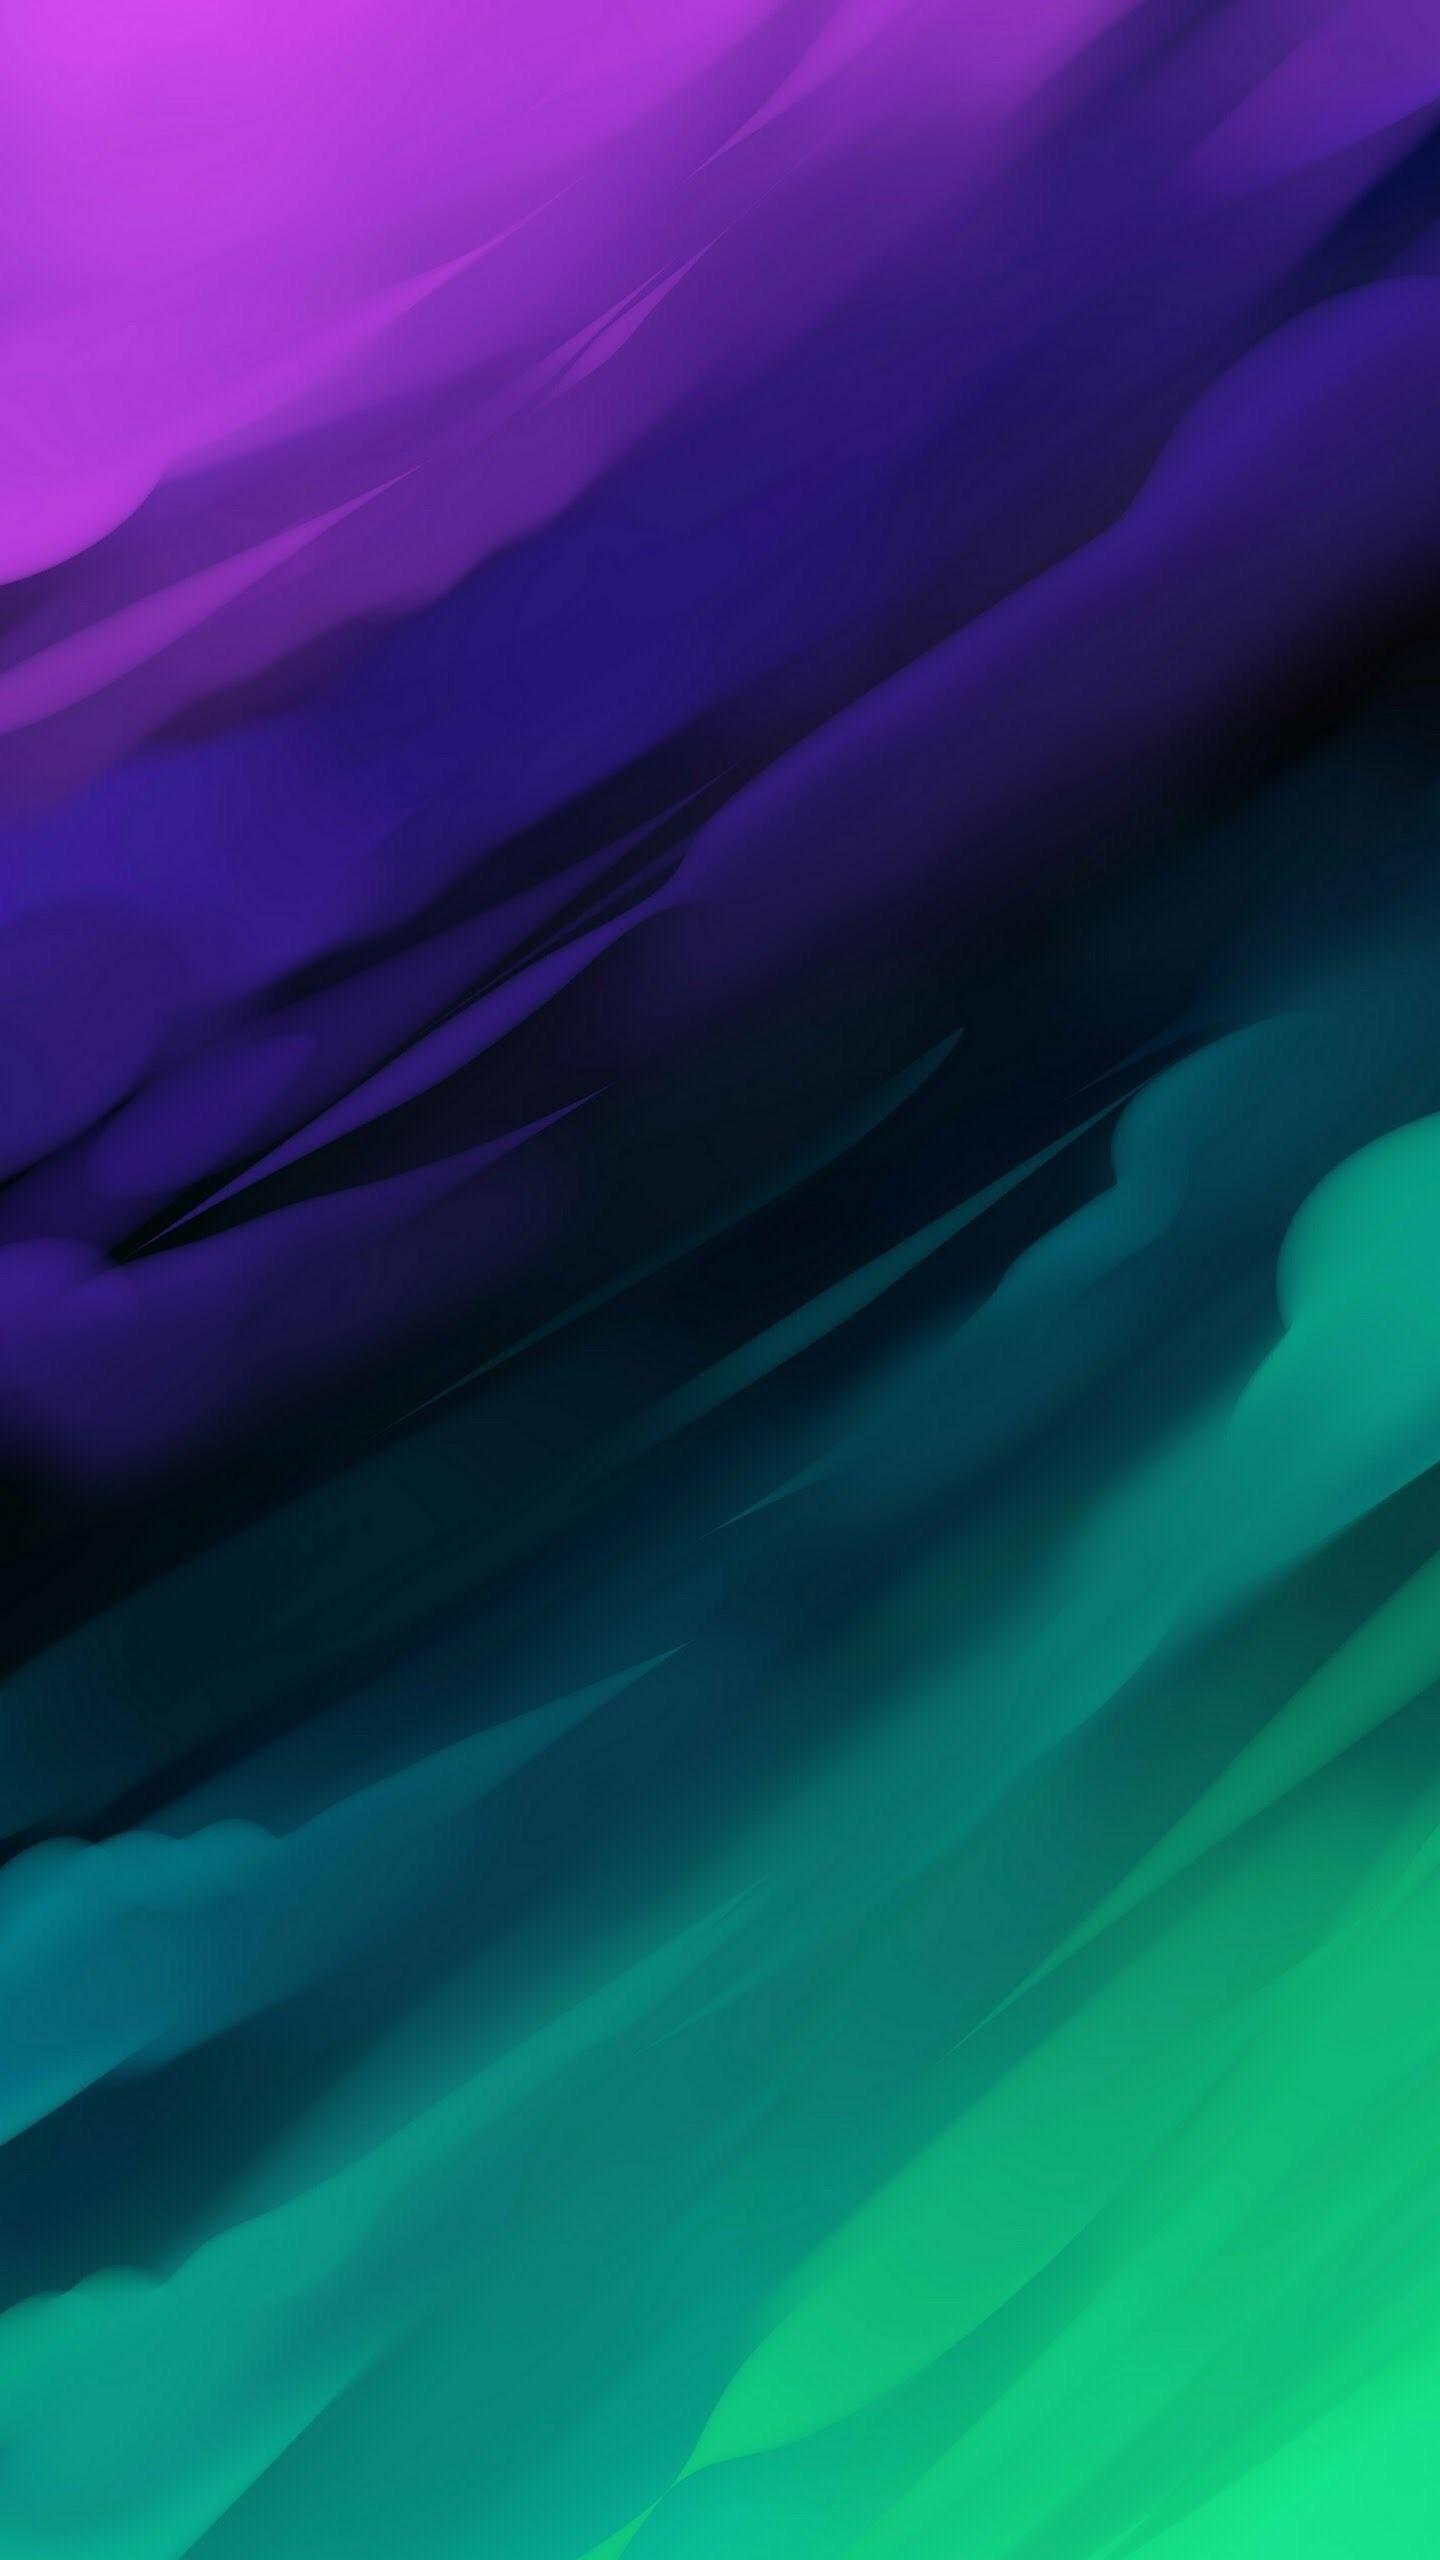 1440x2560 Purple and Turquoise Wallpapers Top Free Purple and Turquoise Backgrounds